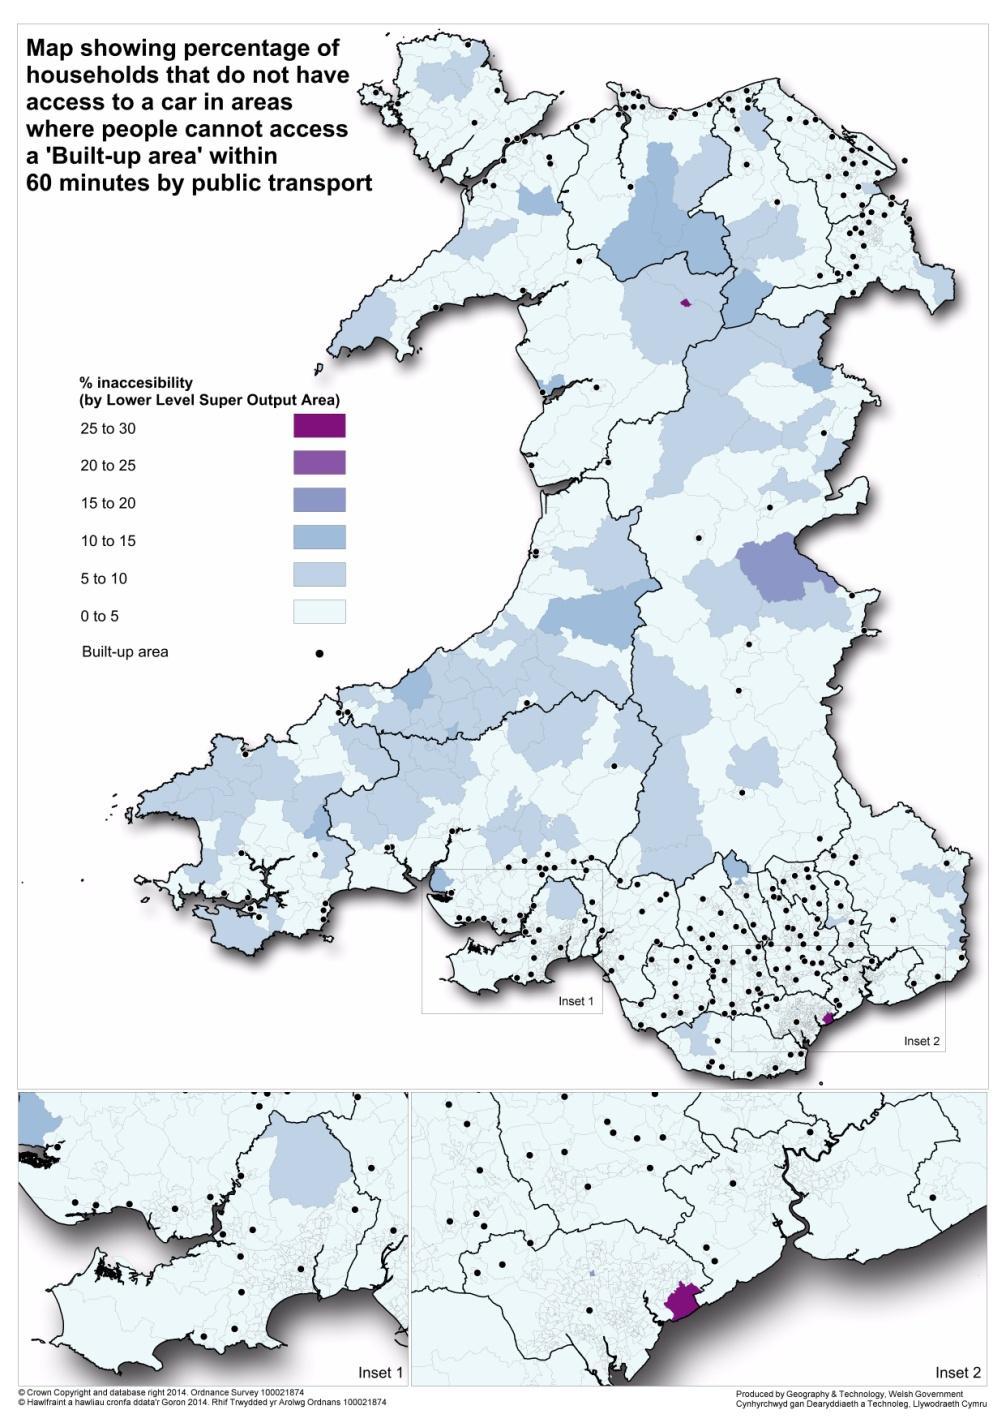 2.7.19 Combining data showing access by public transport and access to a car reveals that of those households who cannot access a built up area by public transport within 60 minutes, 7.